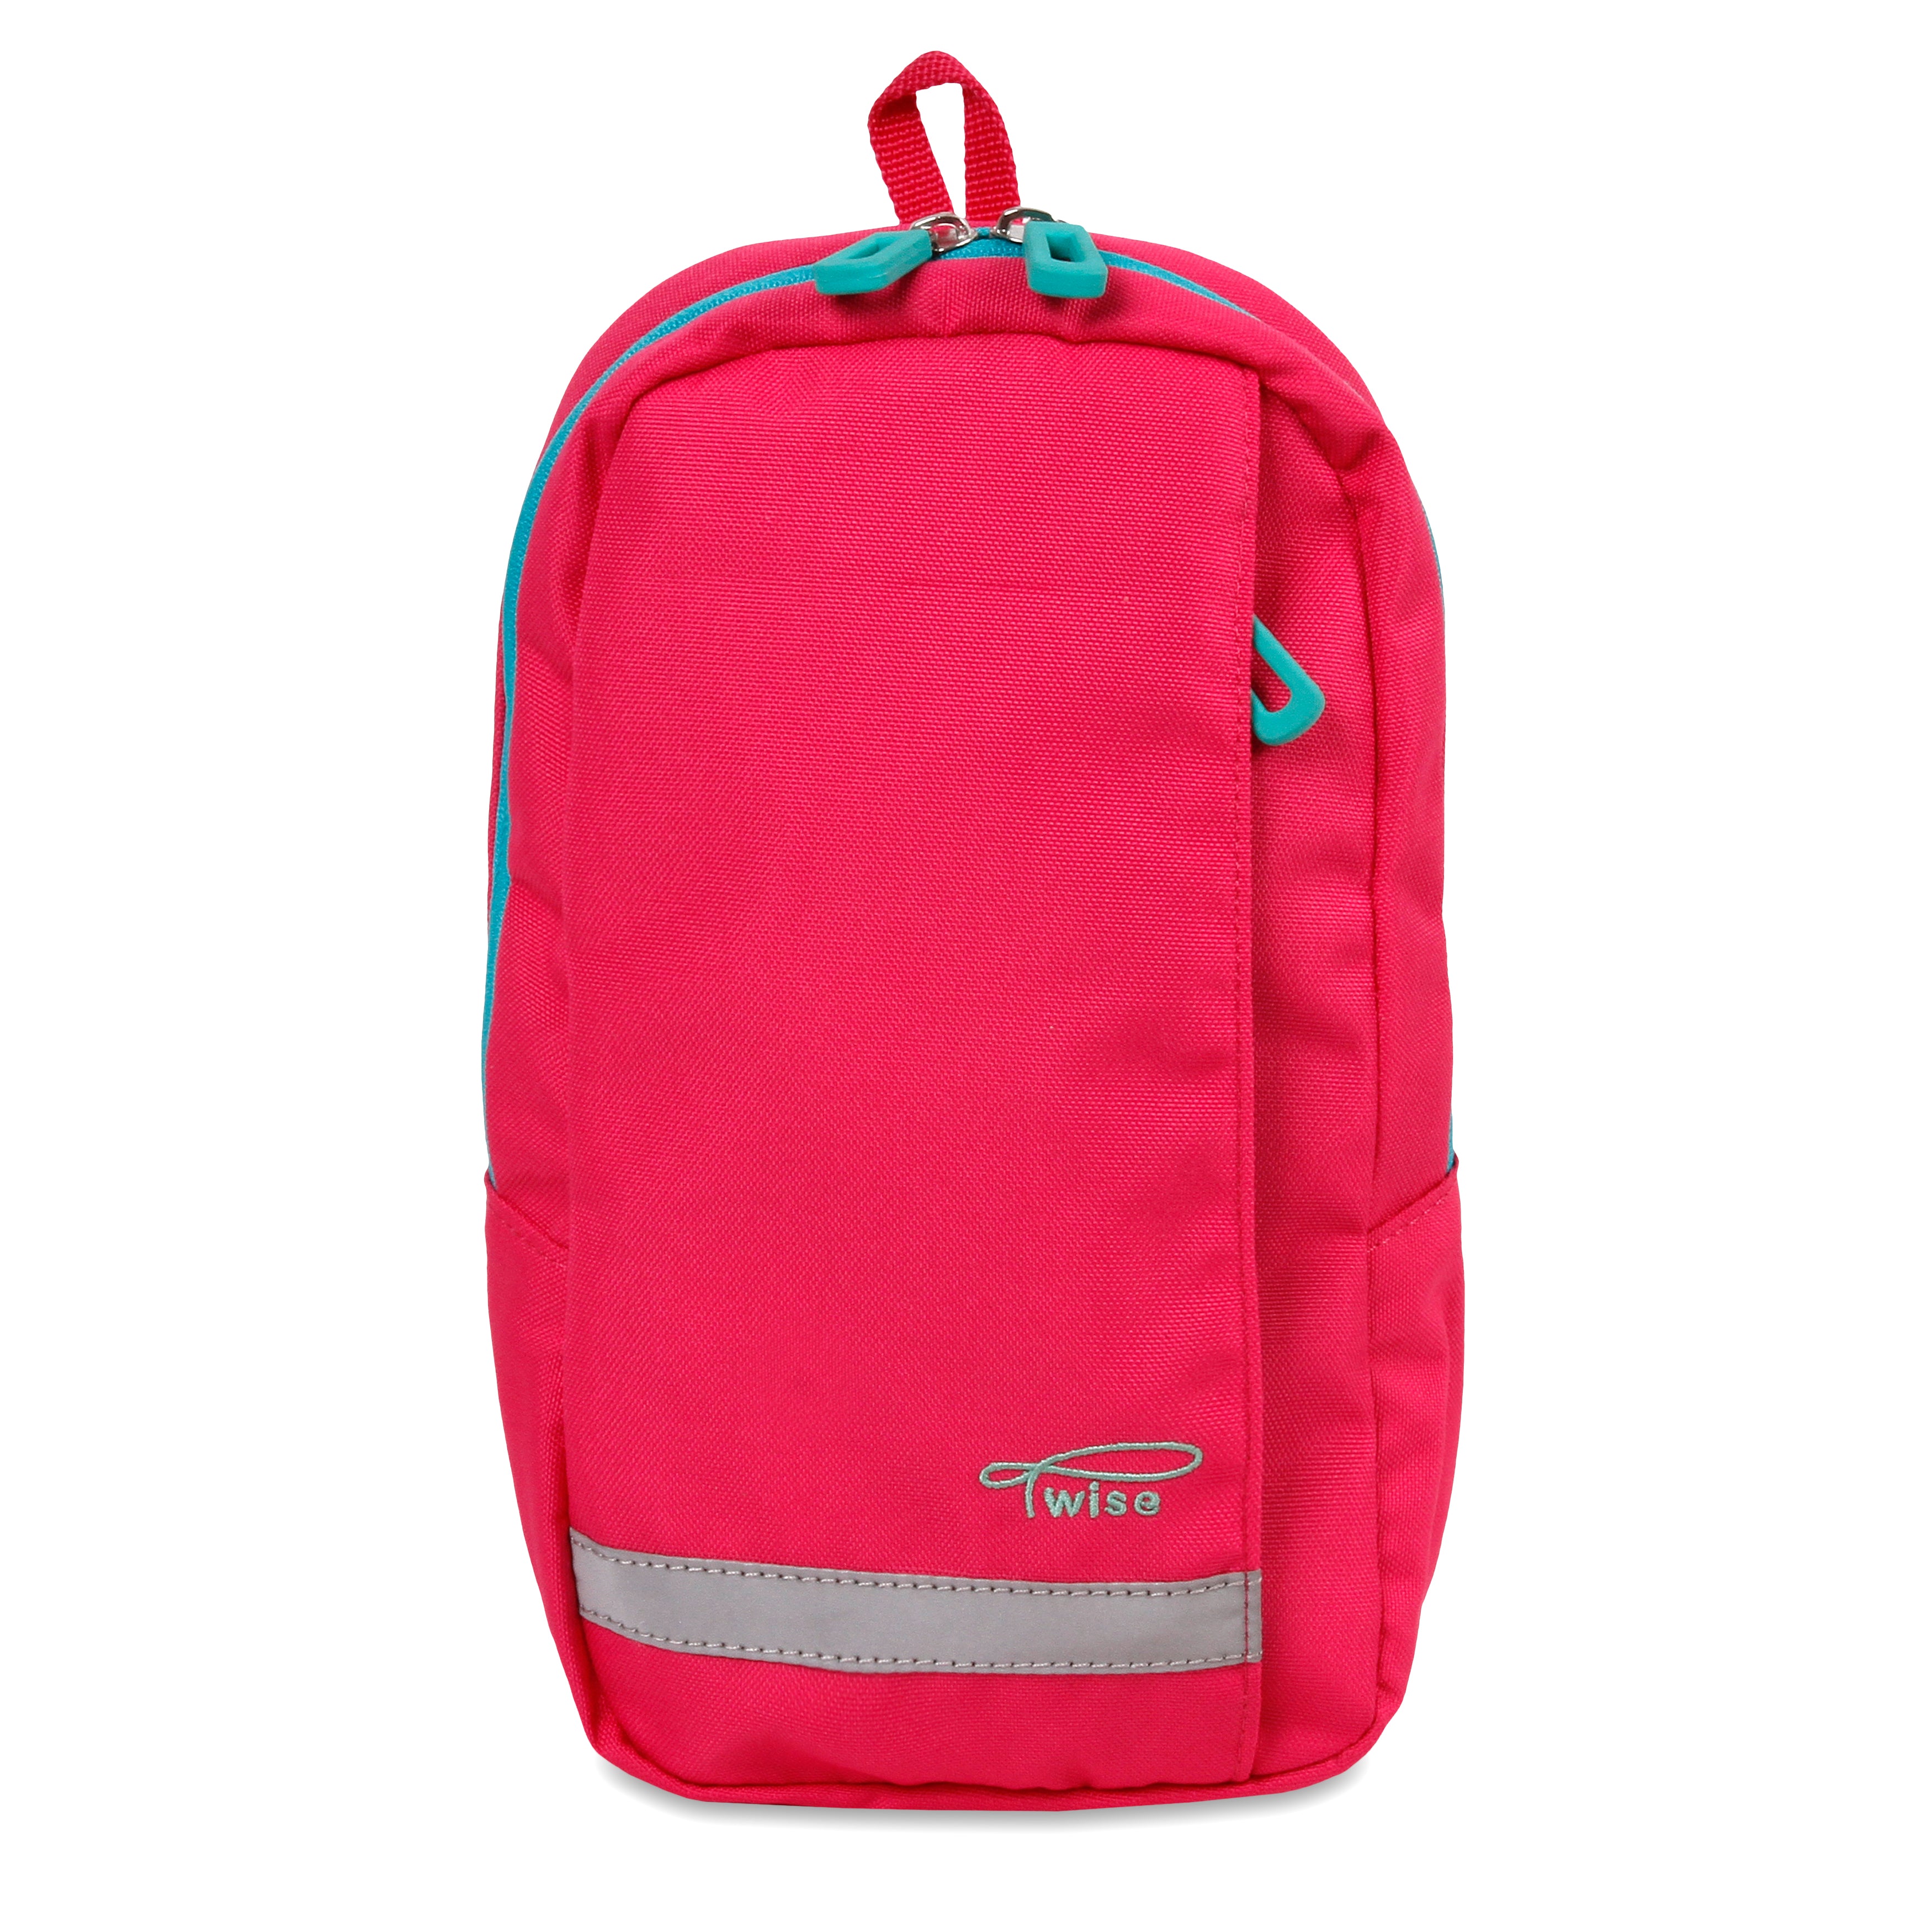 pink sling bag products for sale